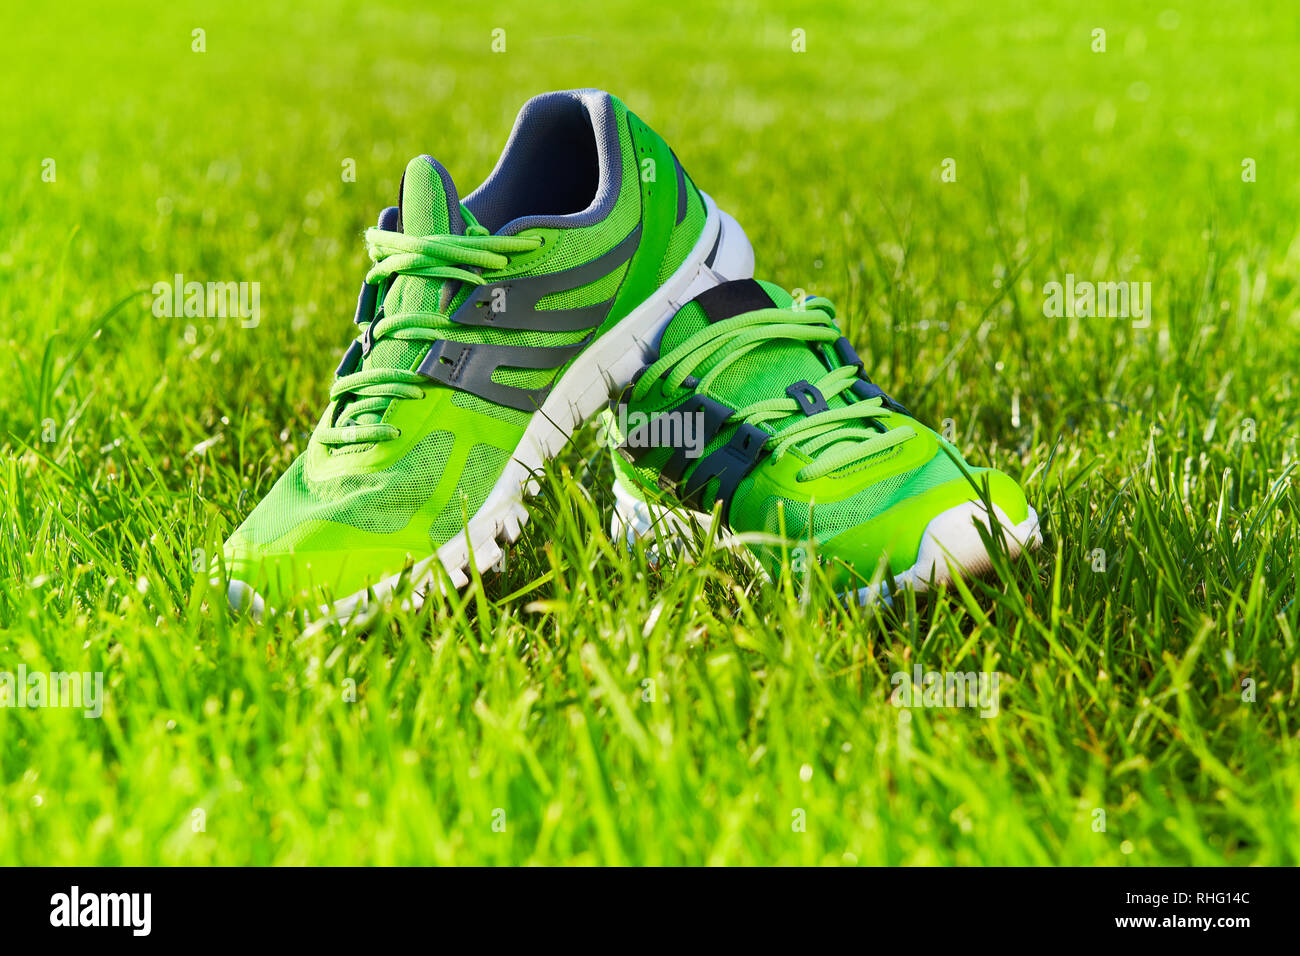 running shoes on grass